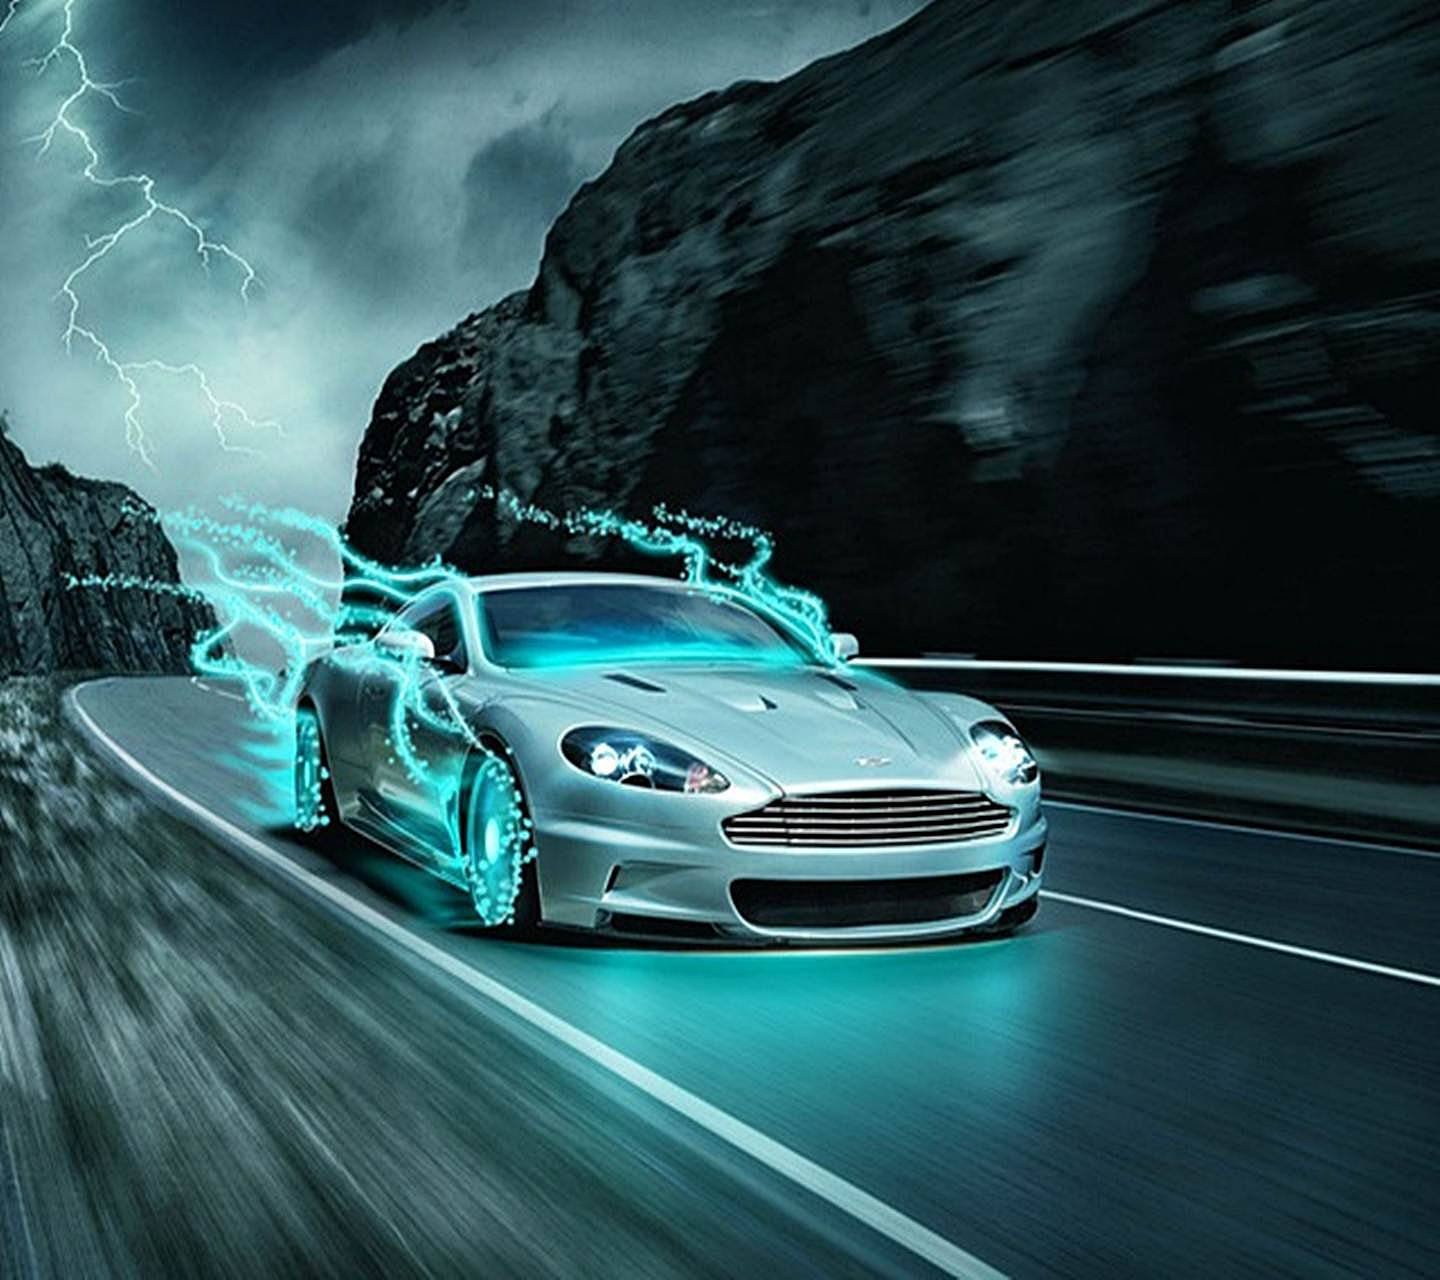 Turquoise Blue Fire Car On Highway Wallpaper